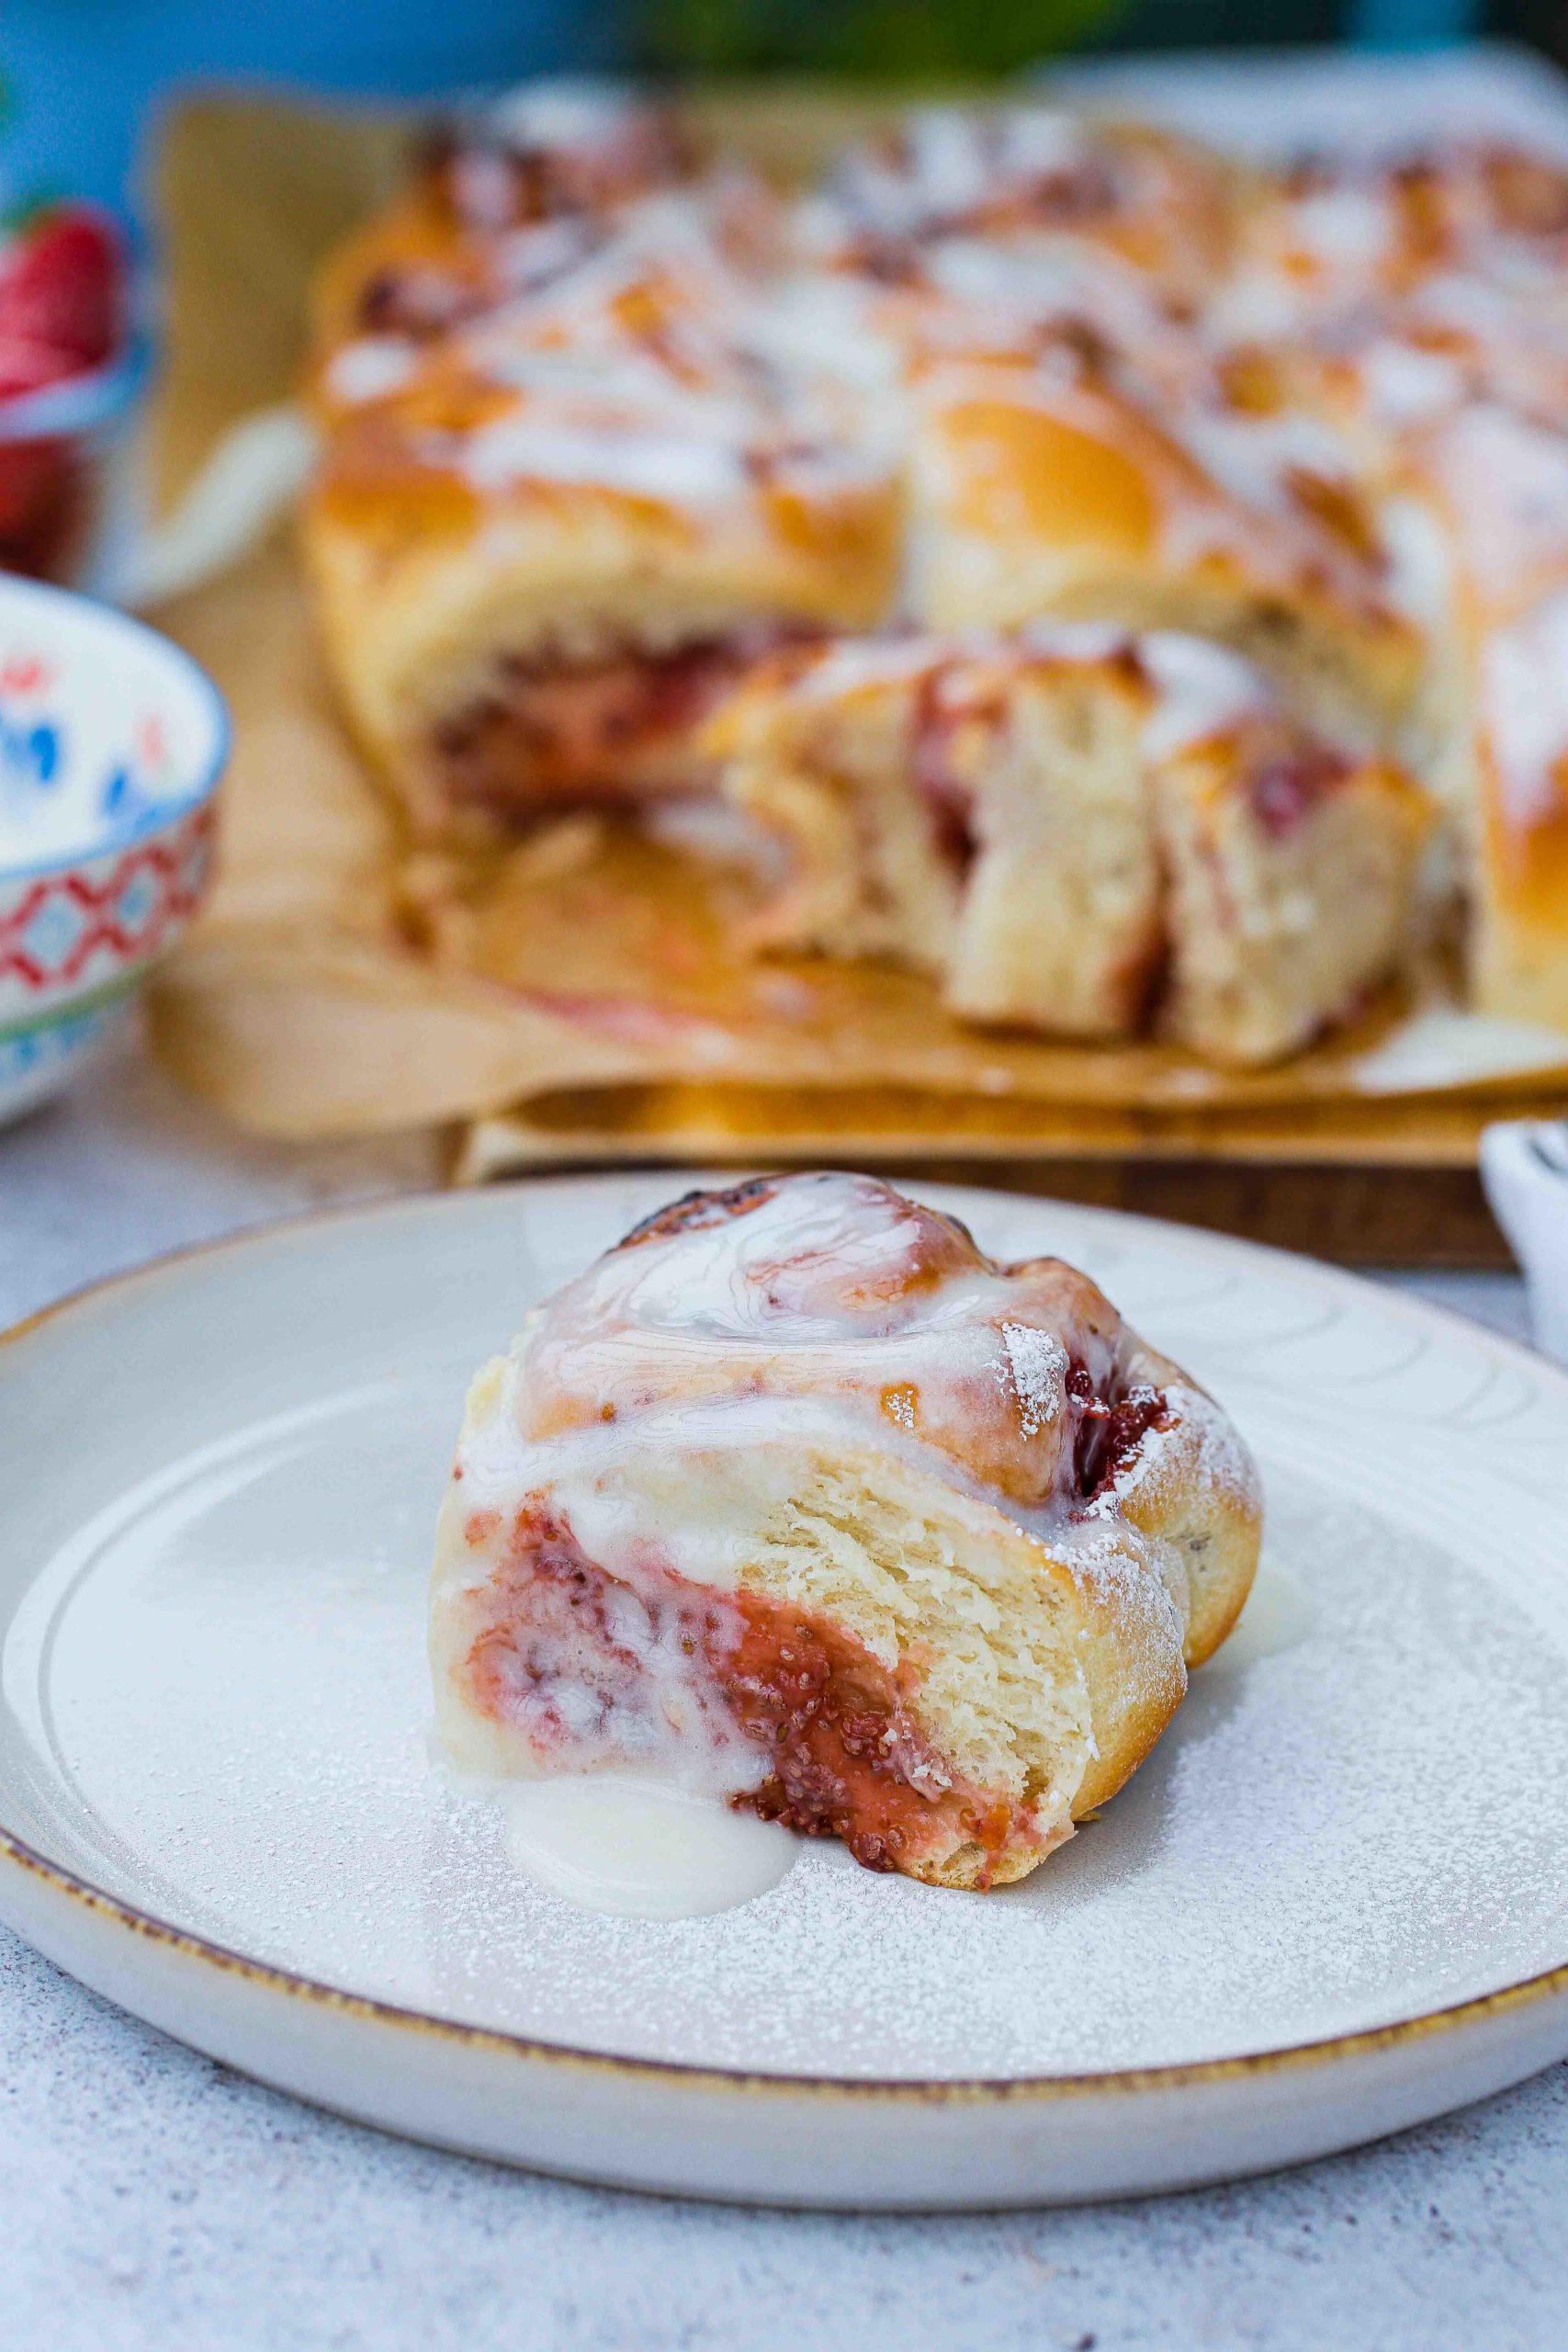 Soft, fluffy dough with a sweet homemade strawberry jam filling these vegan strawberry cinnamon rolls are such a breakfast treat! Recipe on thecookandhim.com | #strawberryrecipes #strawberrycinnamonrolls #homemadebread #cinnamonrolls #summerjam #summerfruits #strawberries